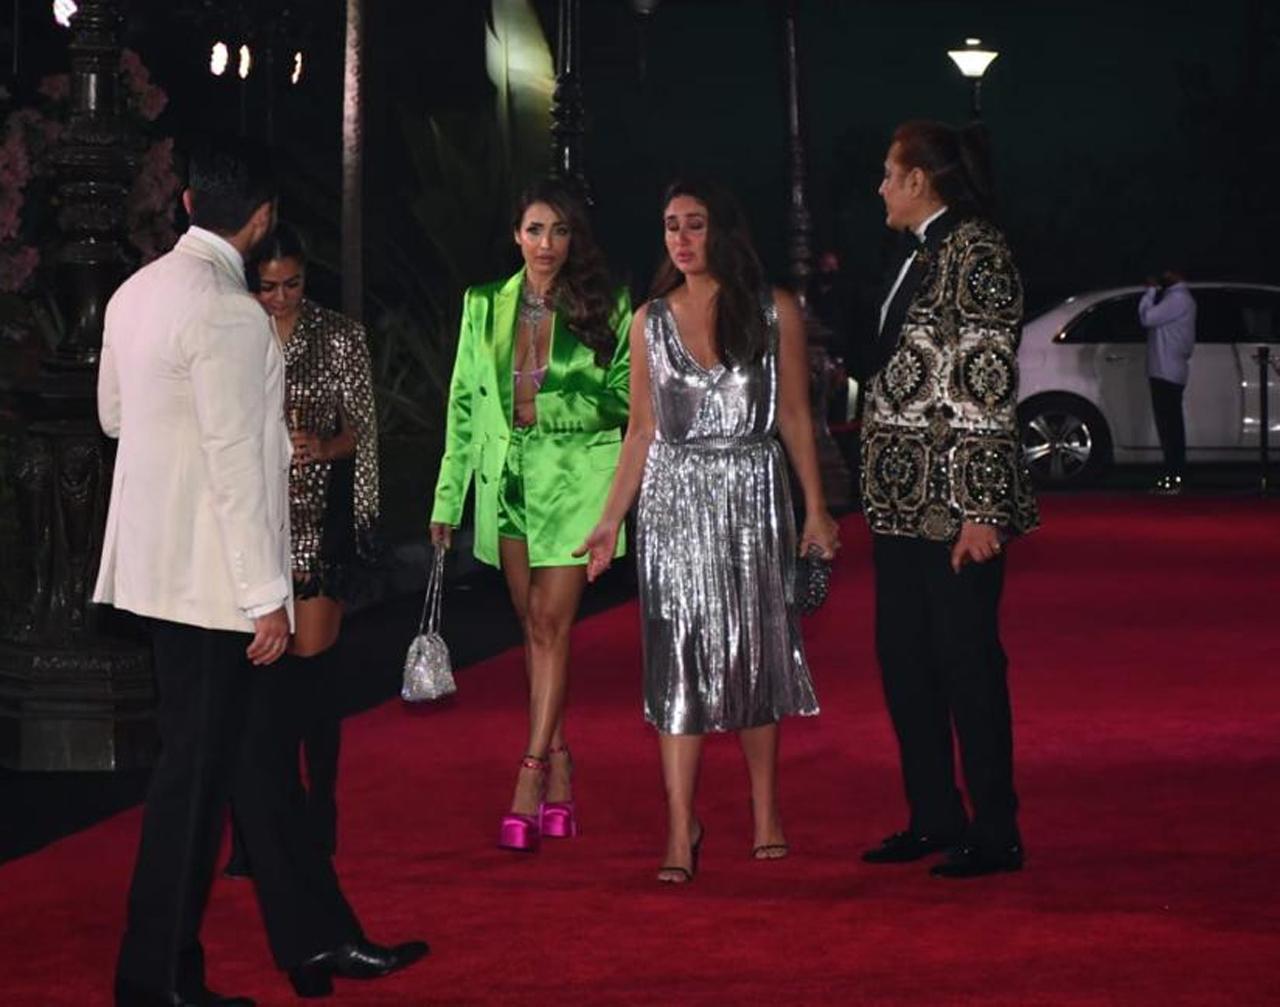 Another caught off guard moment. Why is Kareena irritated? Any guesses?